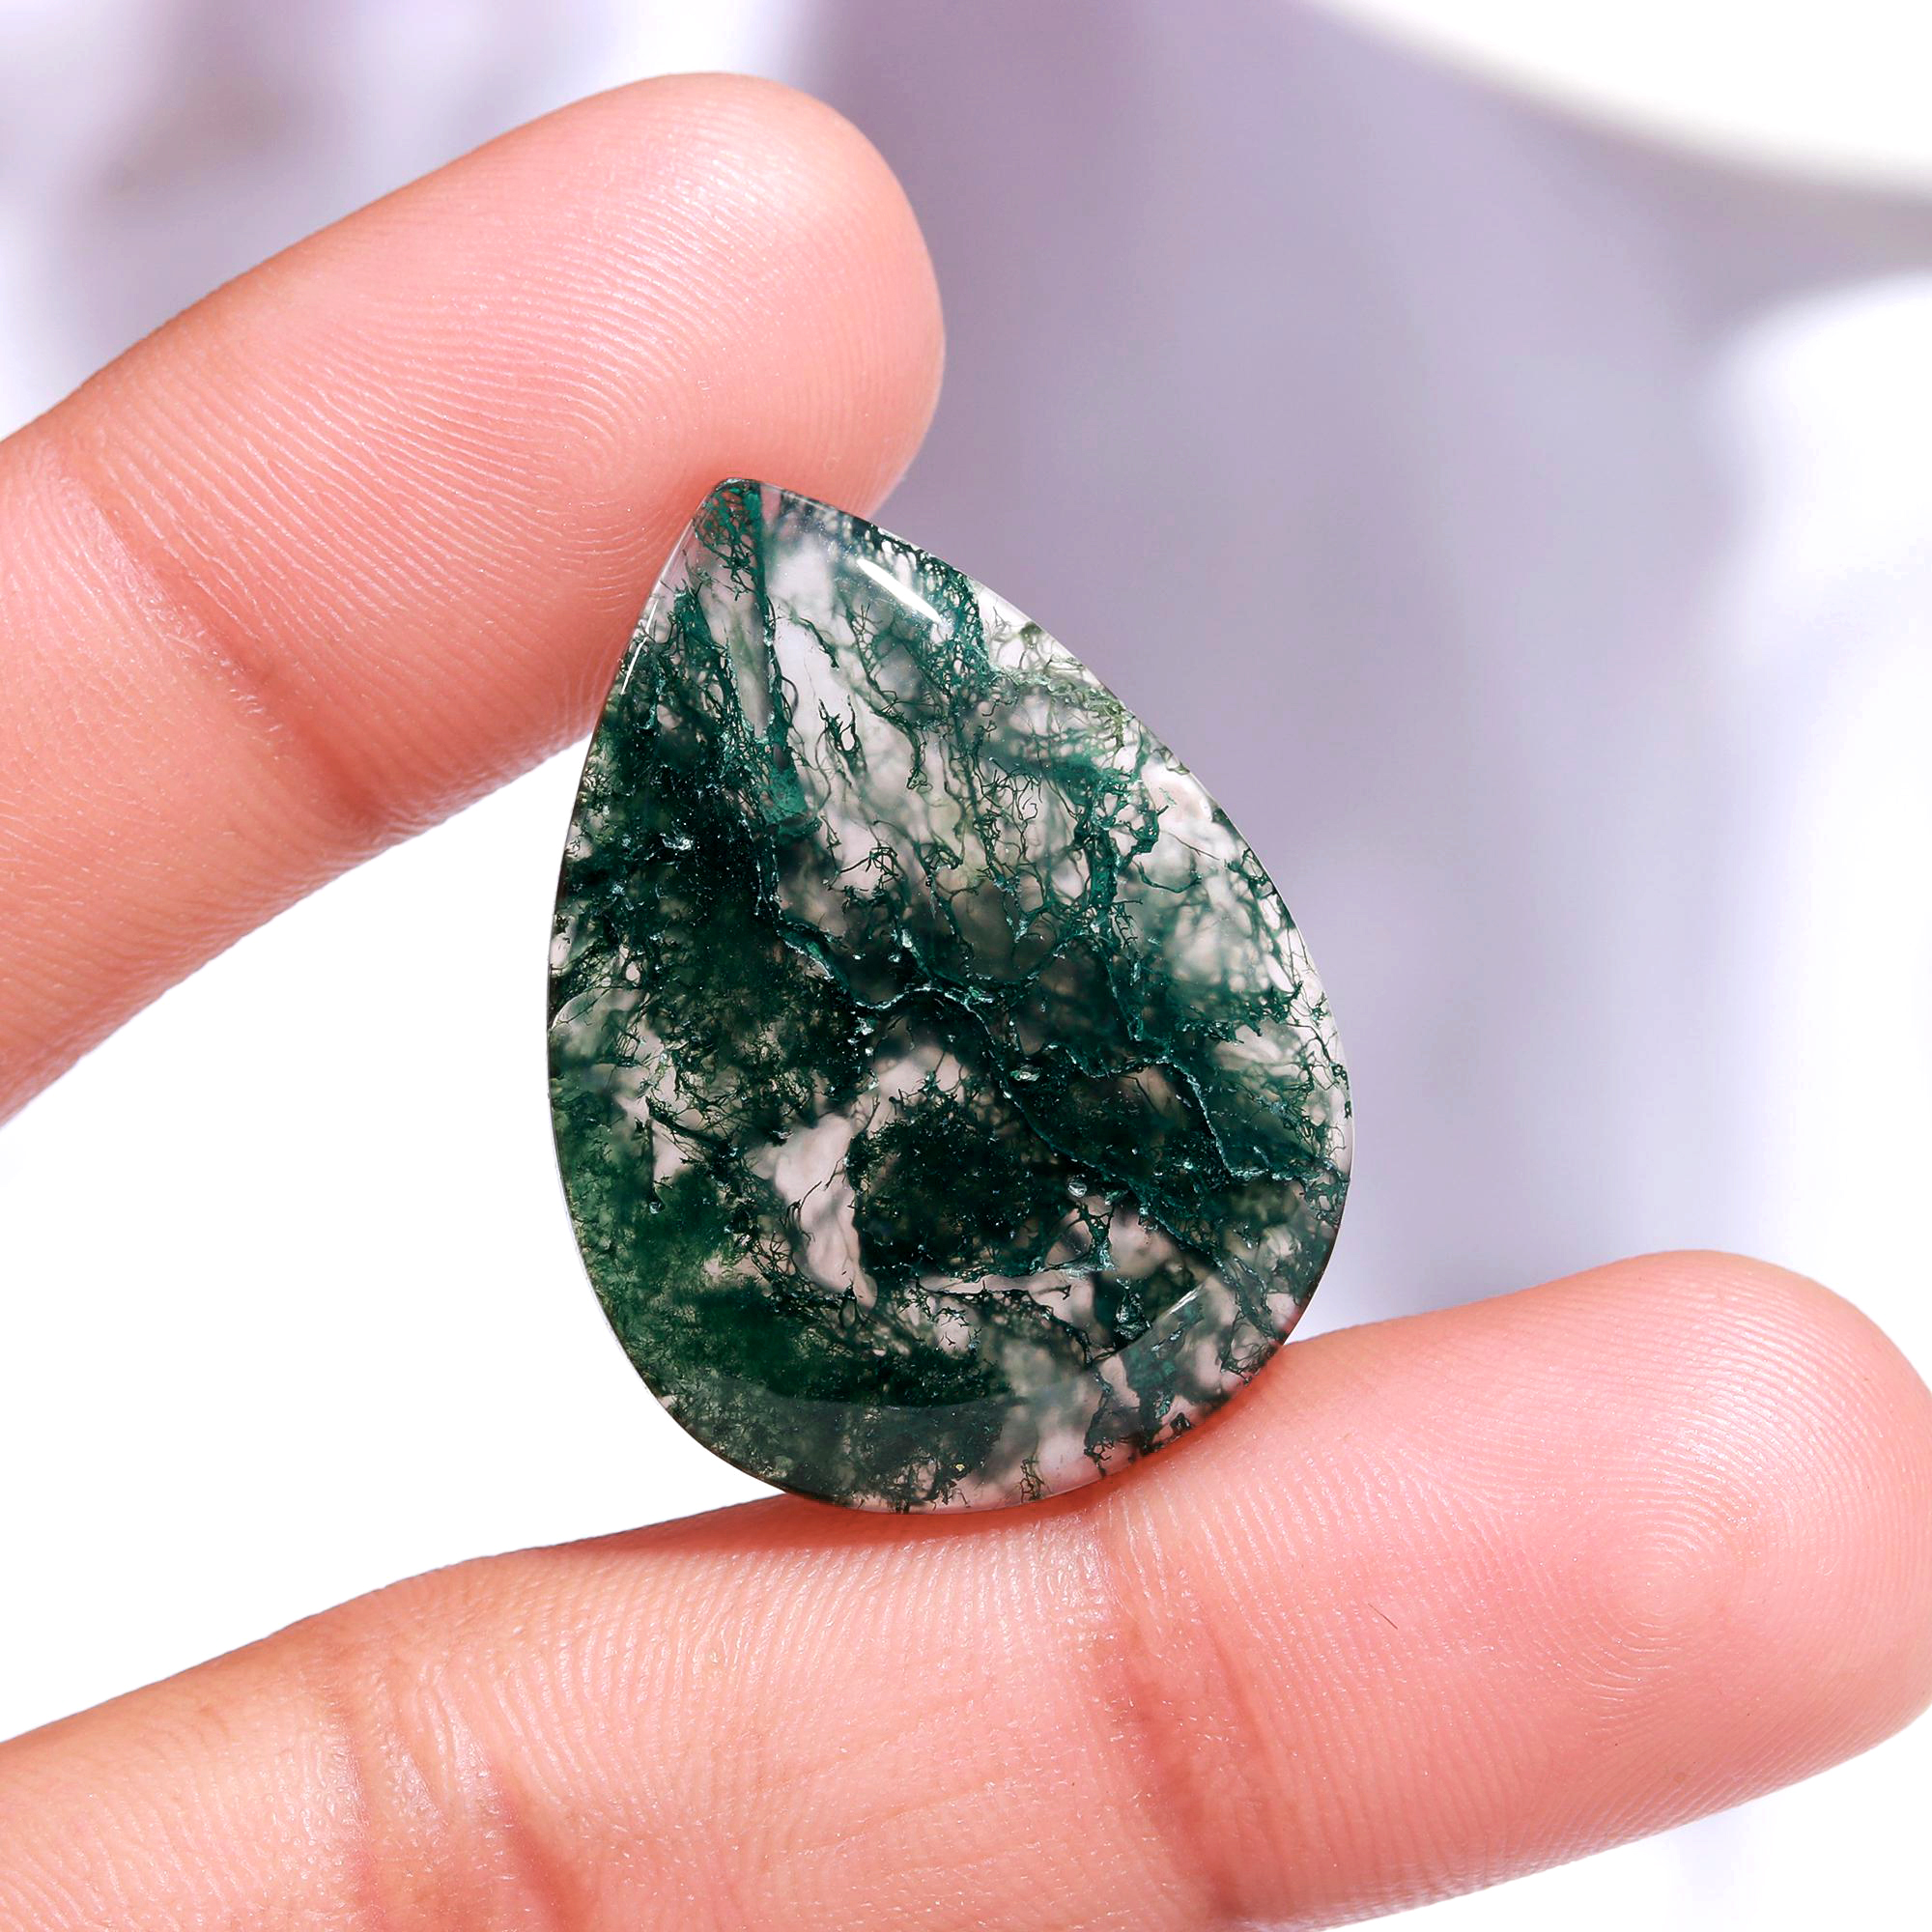 11 Pc 172 Cts Natural Green Moss Agate Mix Loose gemstone cabochon Wholesale lot polished both side Size 28x20 15x15mm